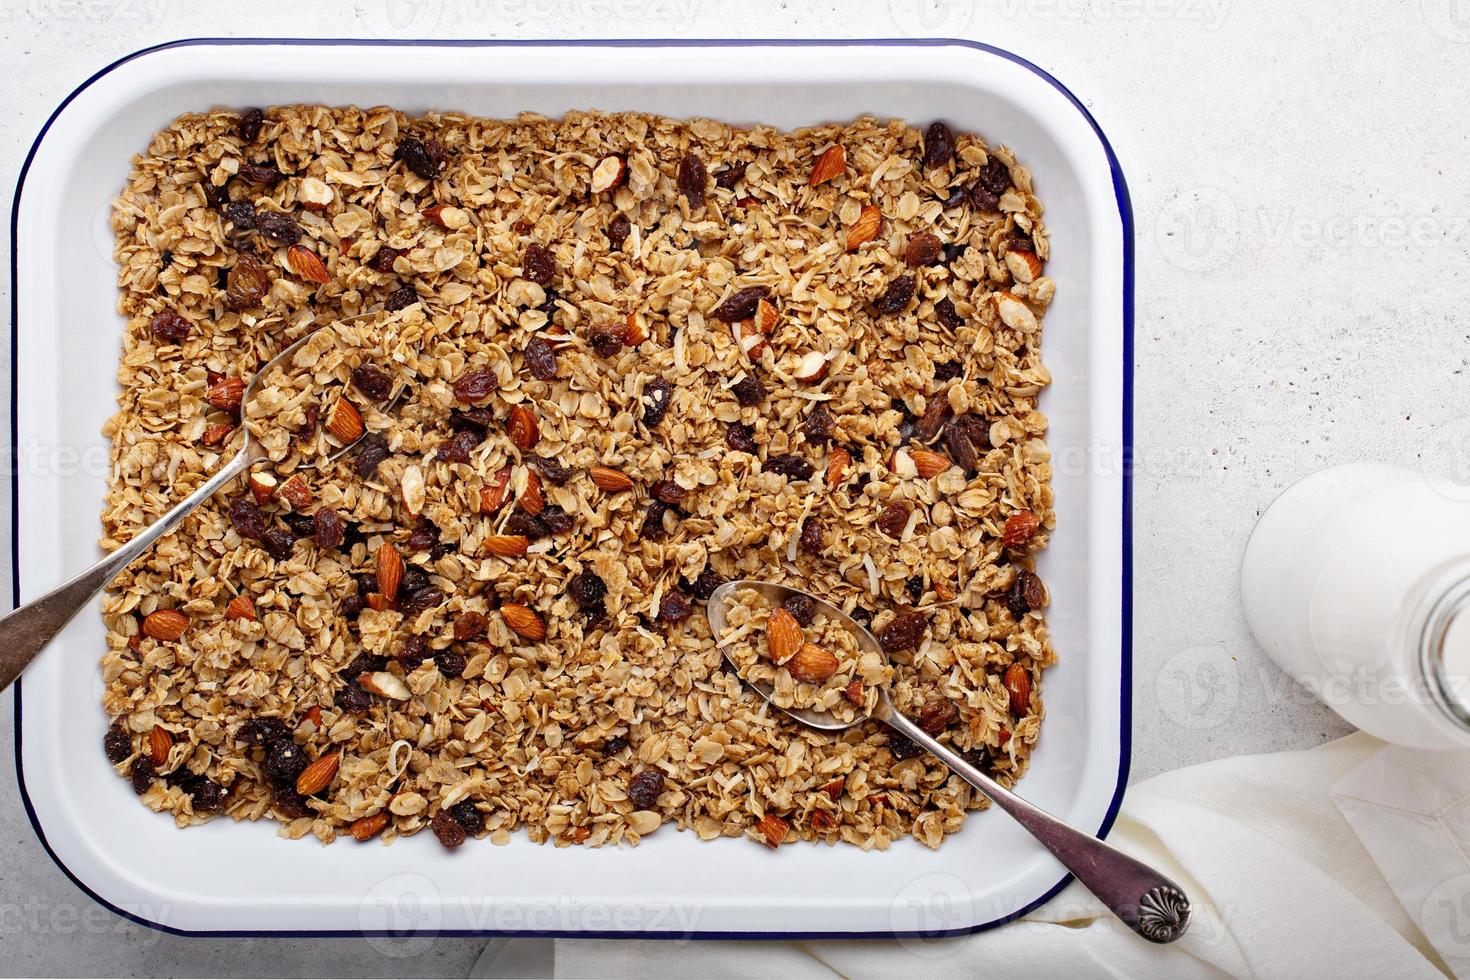 Homemade granola with coconut and almonds photo